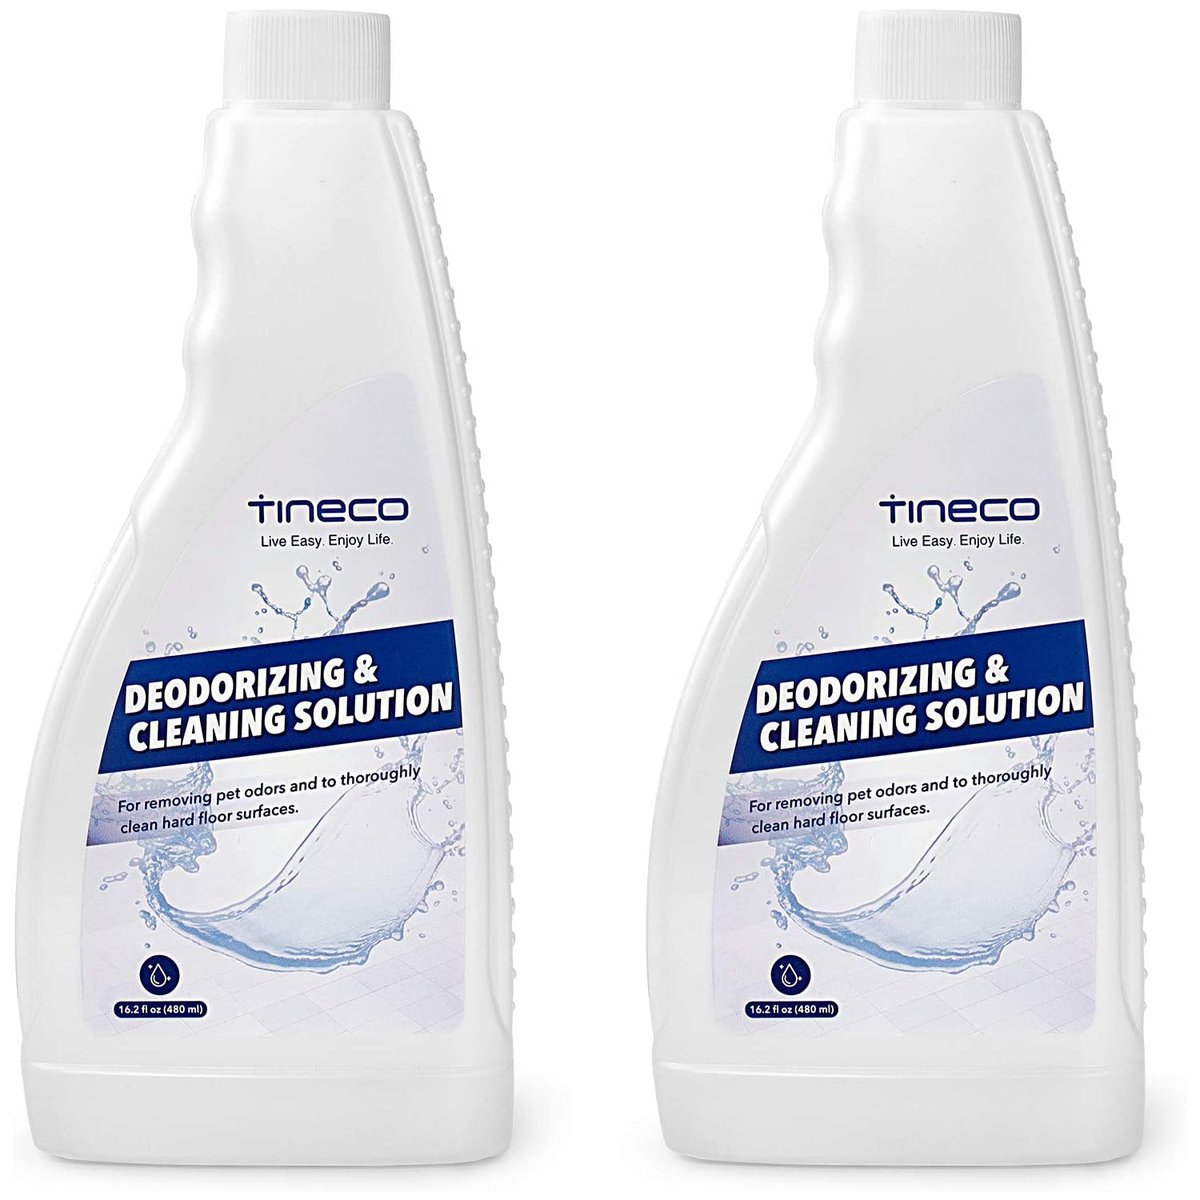 Tineco Multi-Surface Cleaning Solution-16.2 oz * 2 FREE + $7.99 shipping fee